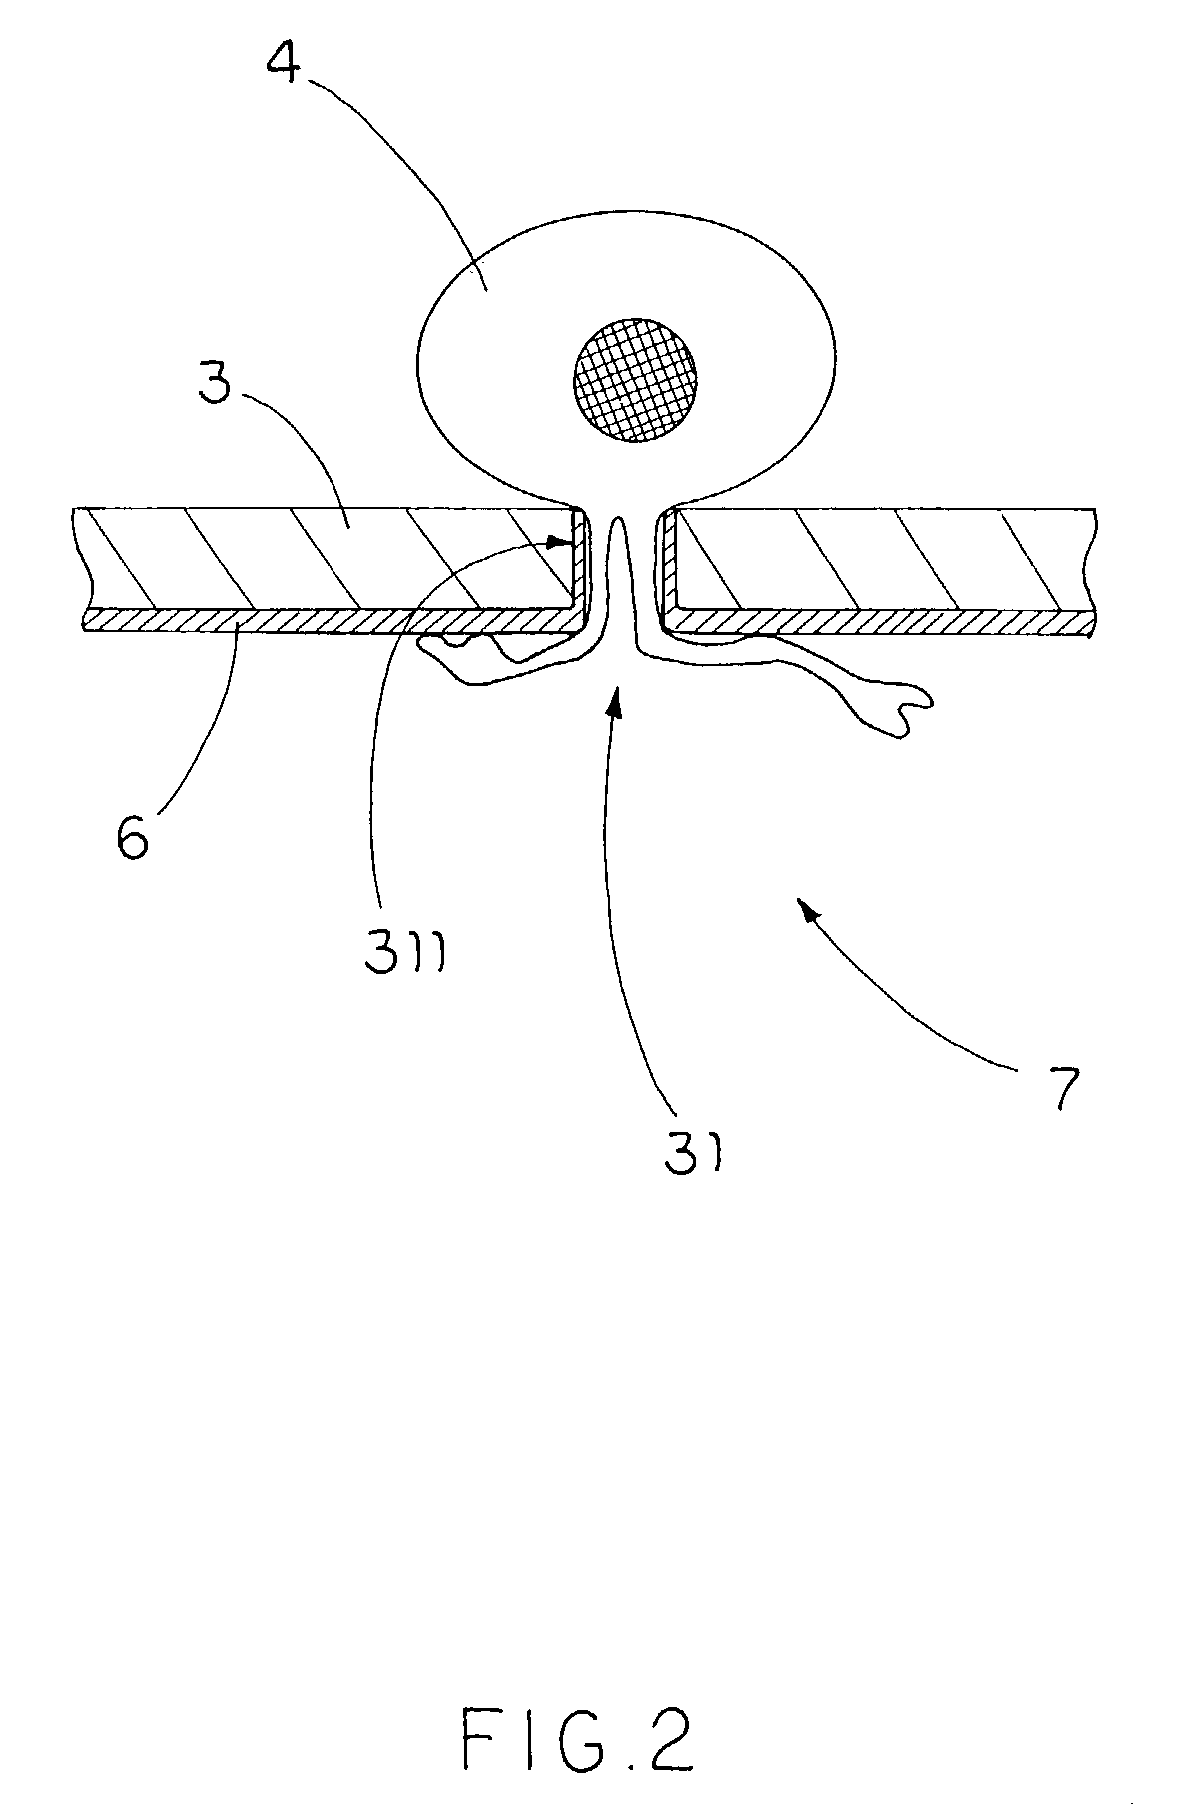 Apparatus and method for purification and assay of neurites